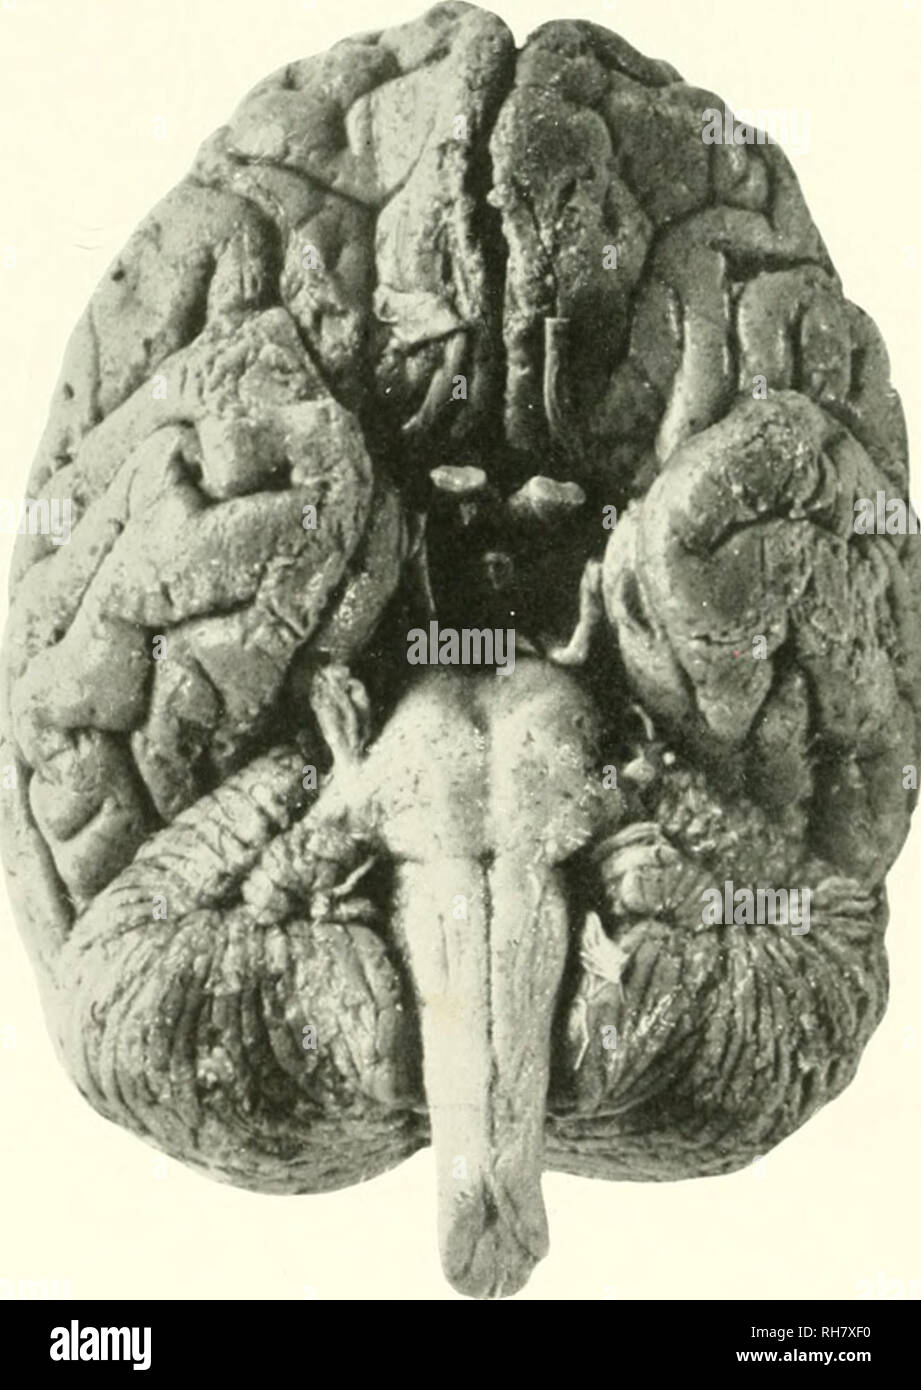 . The brain from ape to man; a contribution to the study of the evolution and development of the human brain. Brain; Evolution; Pongidae. 562 THE HIGHER ANTHROPOIDS A large proportion of all thfir desires is naturall' shown by clireet imitation of the aetions desired. Thus, when one eiiinipanzee wishes to be accomjxmied by another, it gives the latter a nudge and pulls it by the hand.. FIG. 2j2. BASE OF BRAIN, CHIMPANZEE. hiie looknig at hun and making the nio iMiU'iits ol walLnig ni the diri'it ion ol the objecti'e. One wishnig to reeeixe bananas honi another, mutates the movement of sn Stock Photo